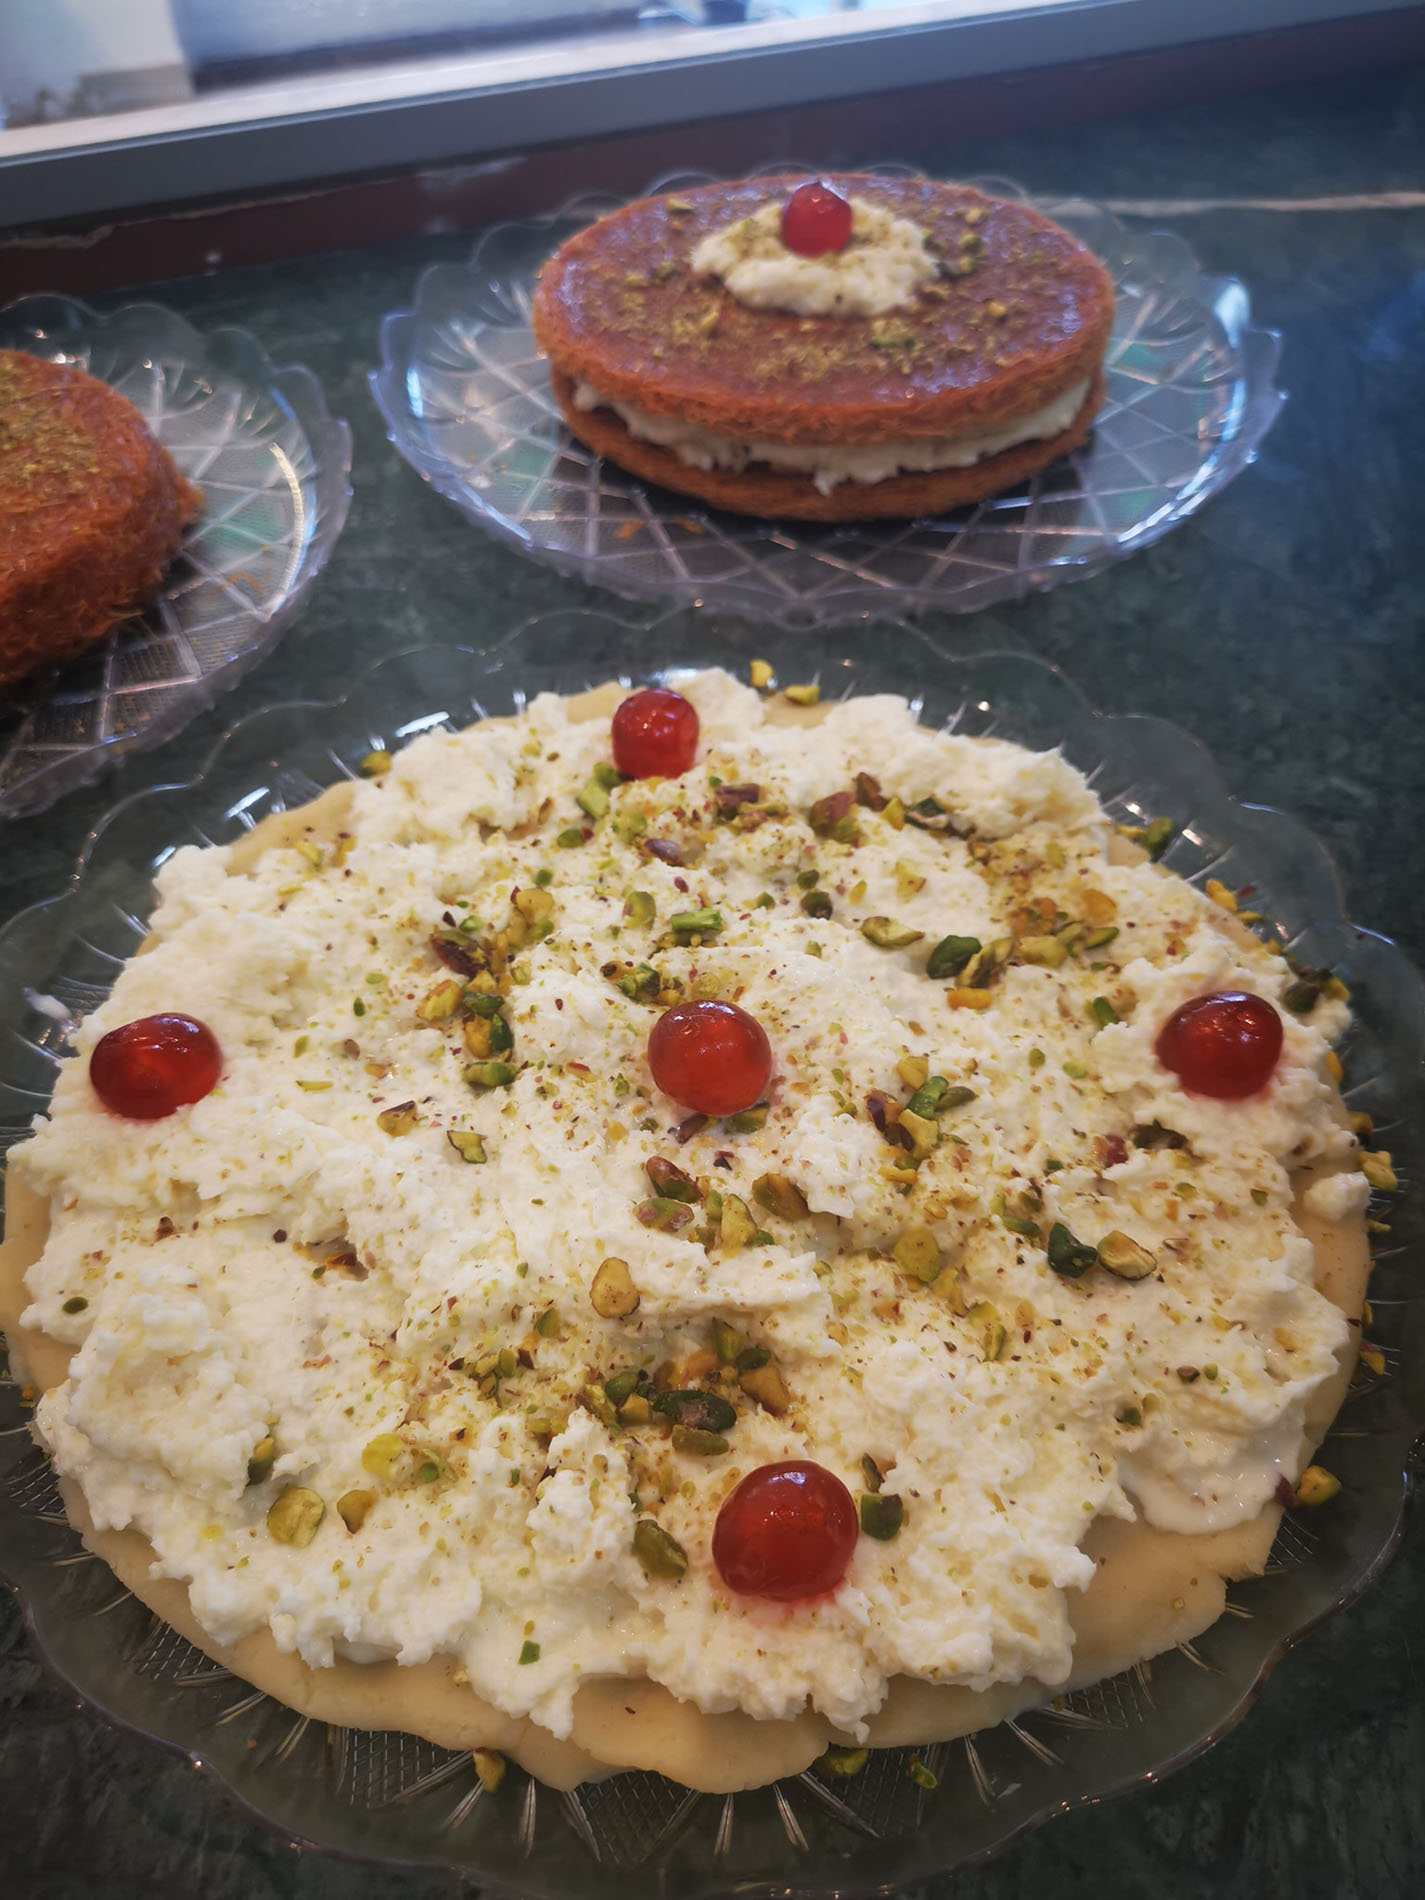 The Lovely Taste of Syrian Desserts Overcome the Bitterness of the Pandemic 2